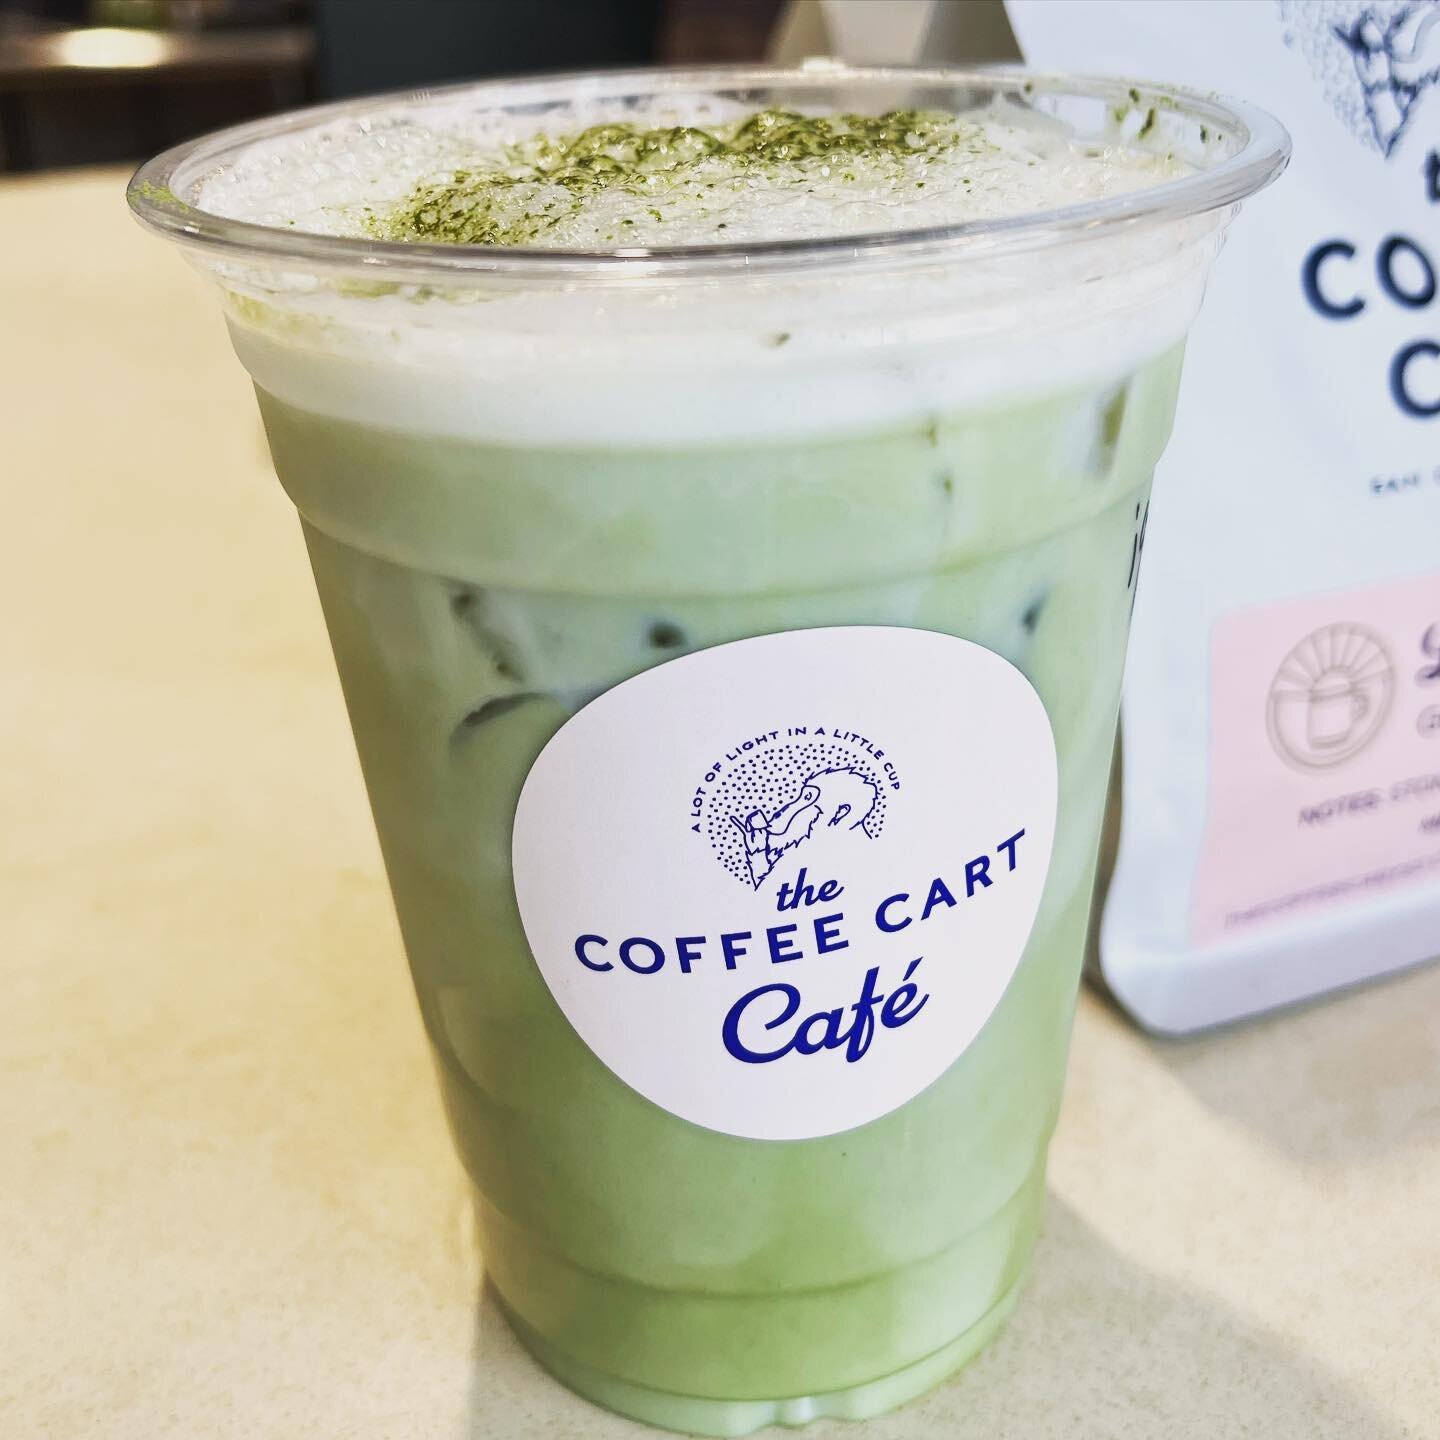 TCCC Spring Specials 🌷🌼:

The Icy-Mint Matcha Latte (featured) 
House made vanilla + mint syrup, organic matcha, milk, finished with minty cold foam 🍵

The Framby Mocha (hot or iced) 
White chocolate + house-made organic raspberry syrup, espresso 